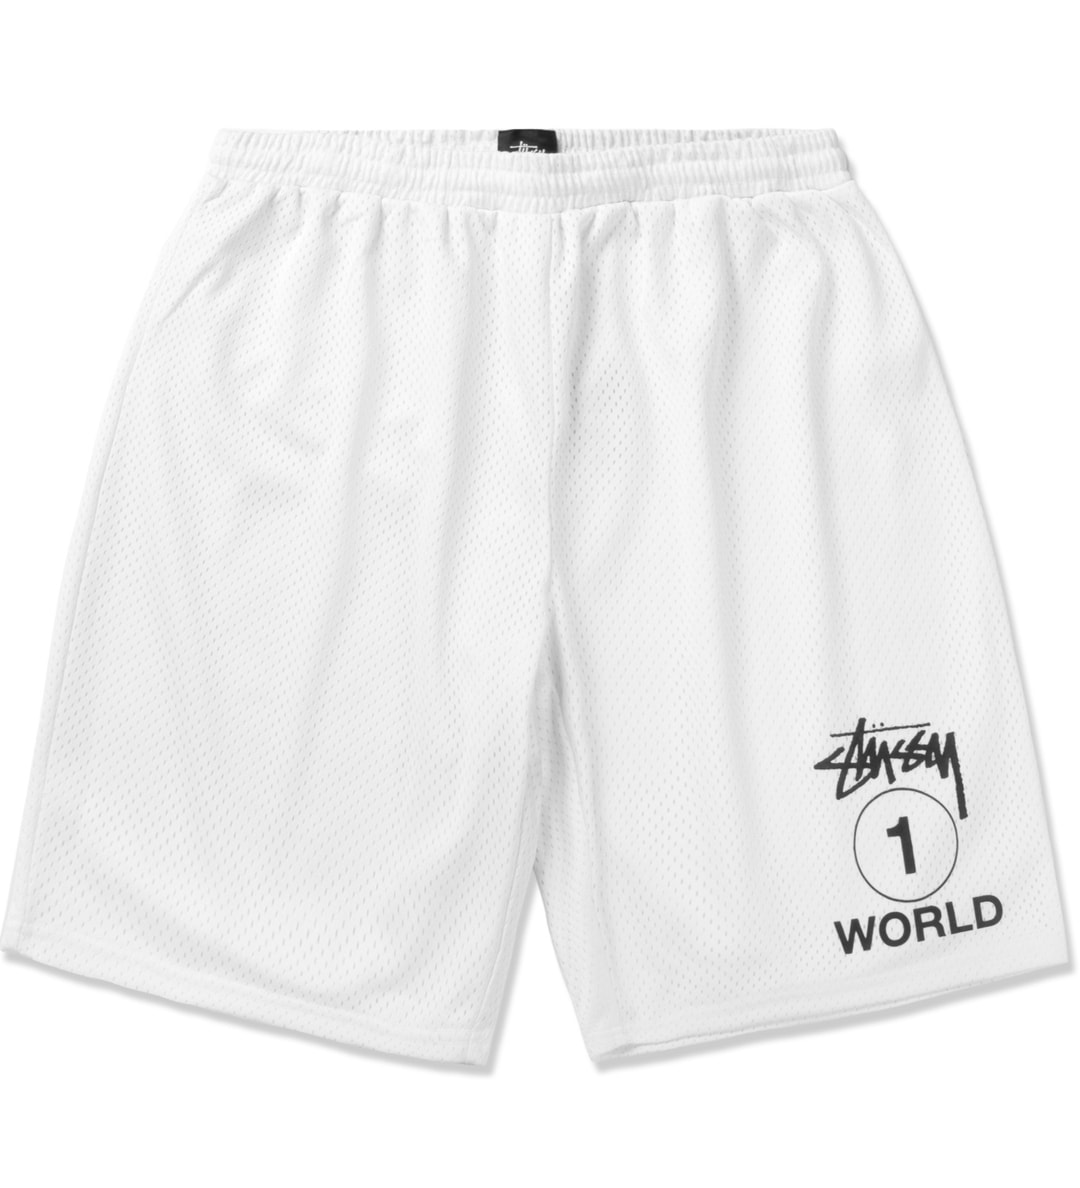 Stüssy - White One World Mesh Shorts | HBX - Globally Curated Fashion and  Lifestyle by Hypebeast